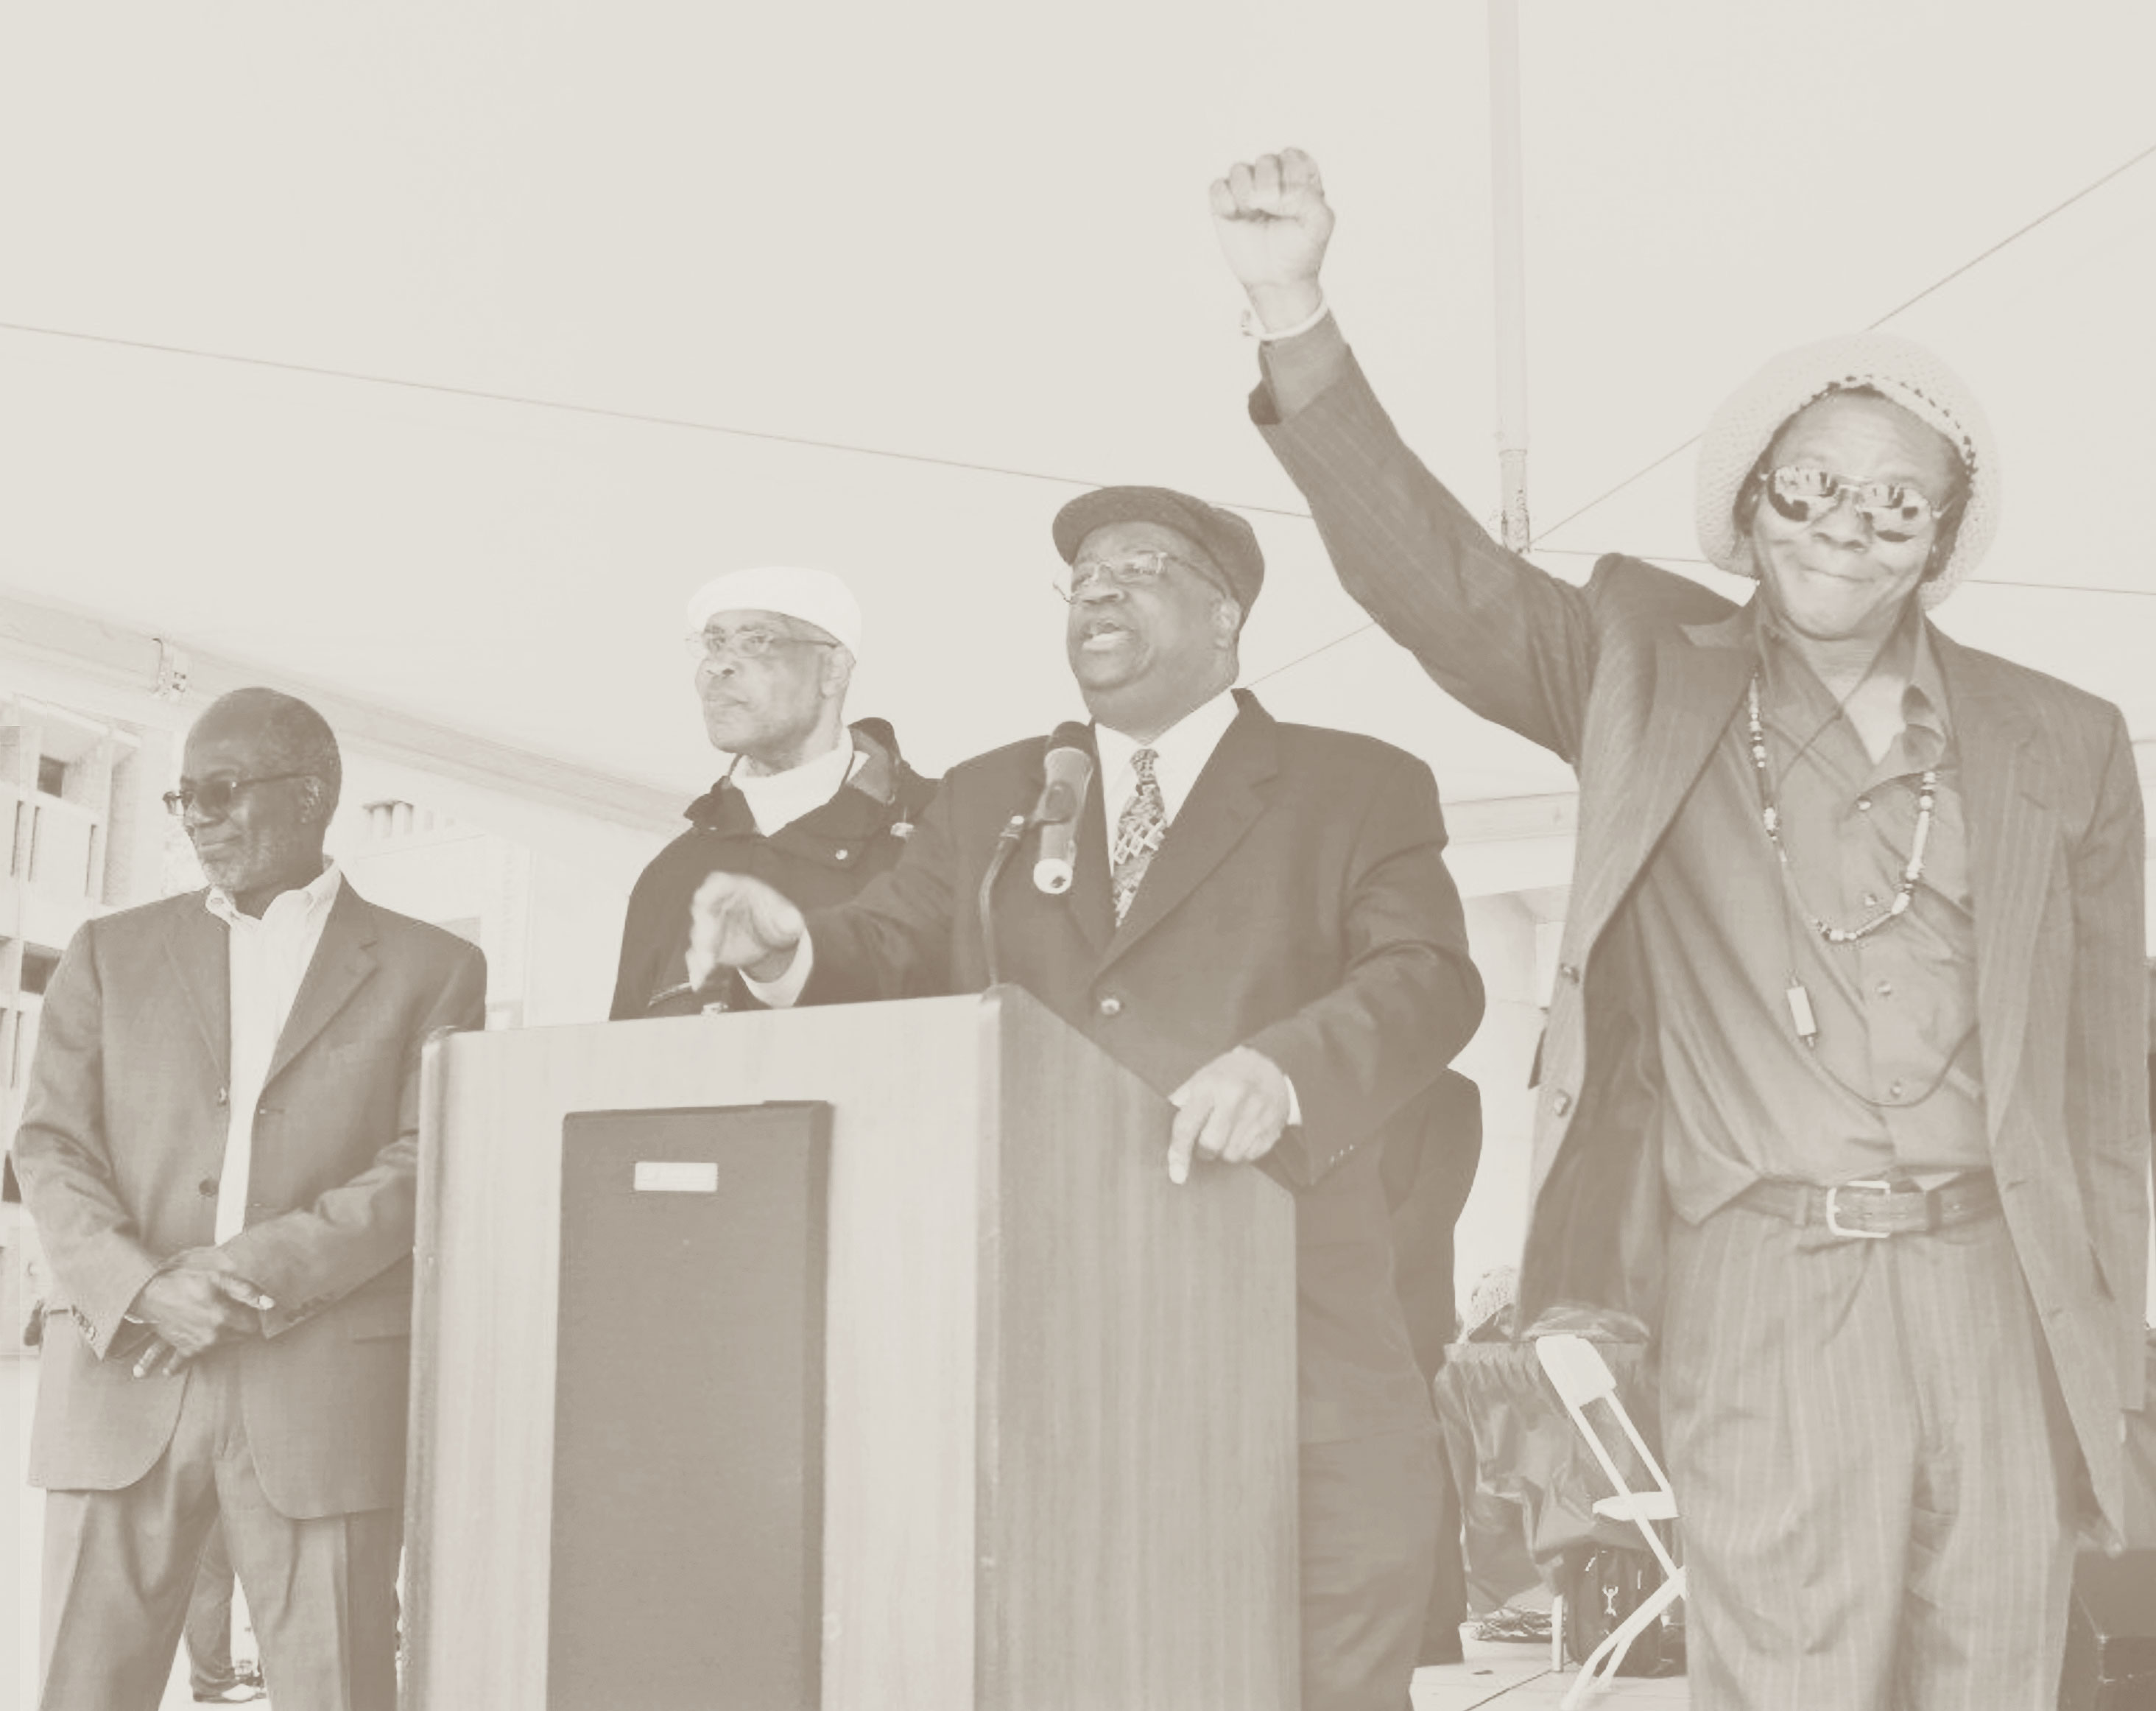 Four men stand near a podium; the man on the far right is holding a Black power fist